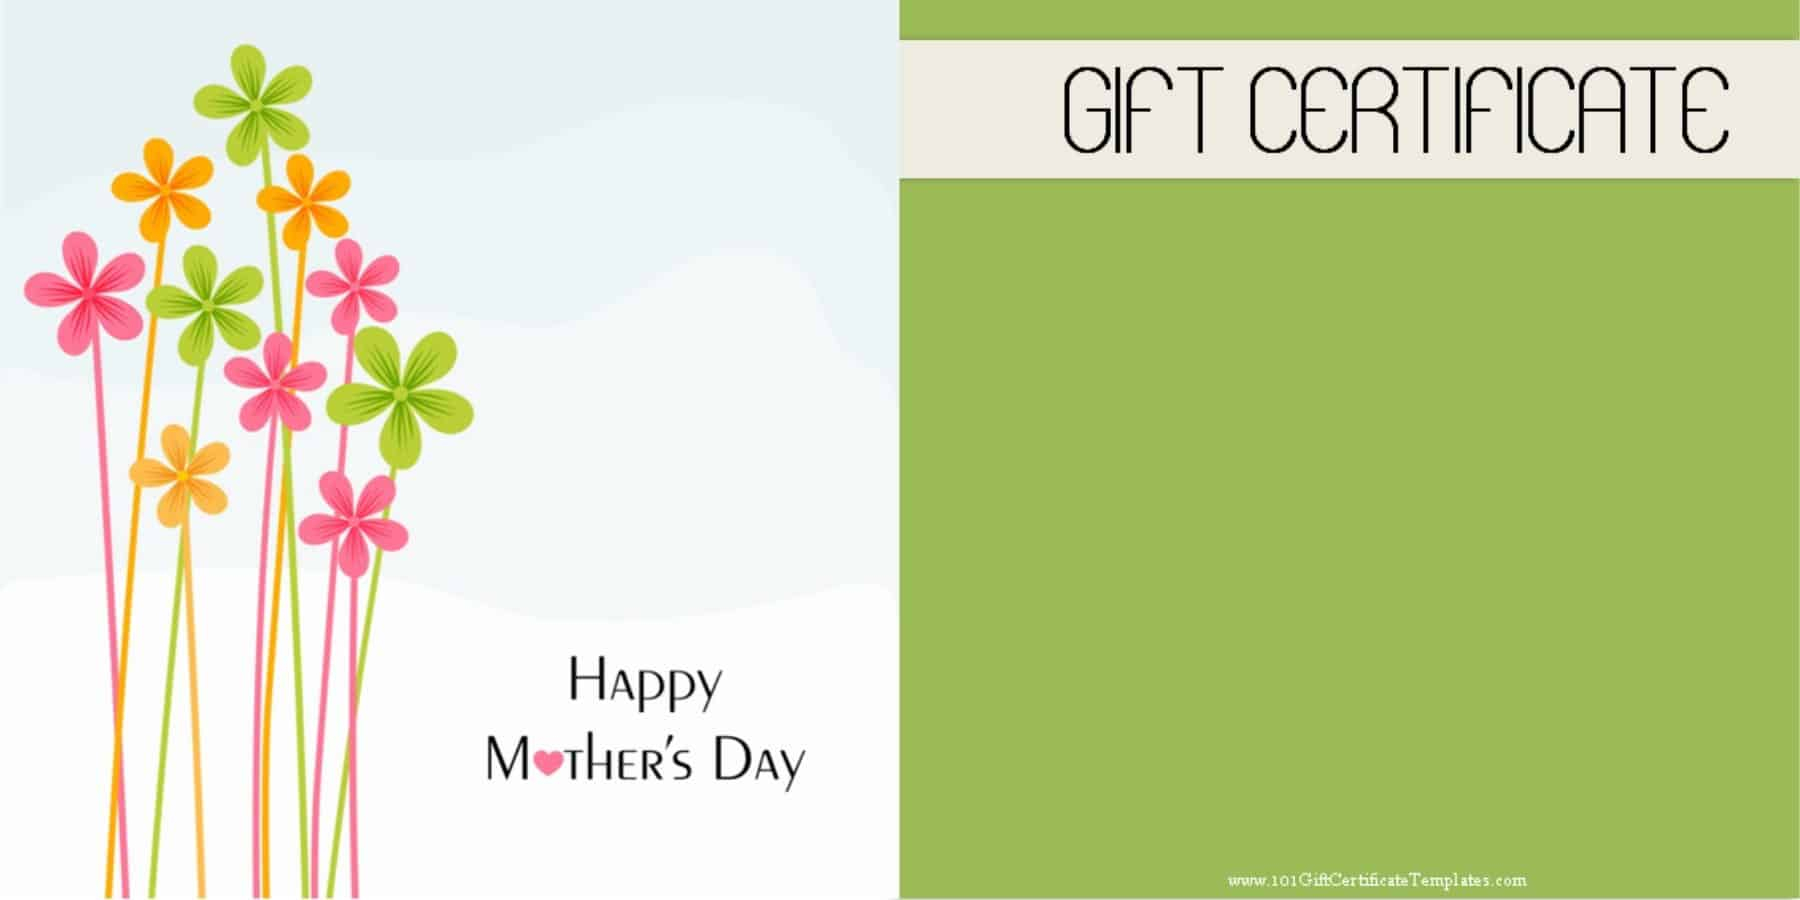 Mother's Day Gift Certificate Templates Regarding Spa Day Gift Certificate Template